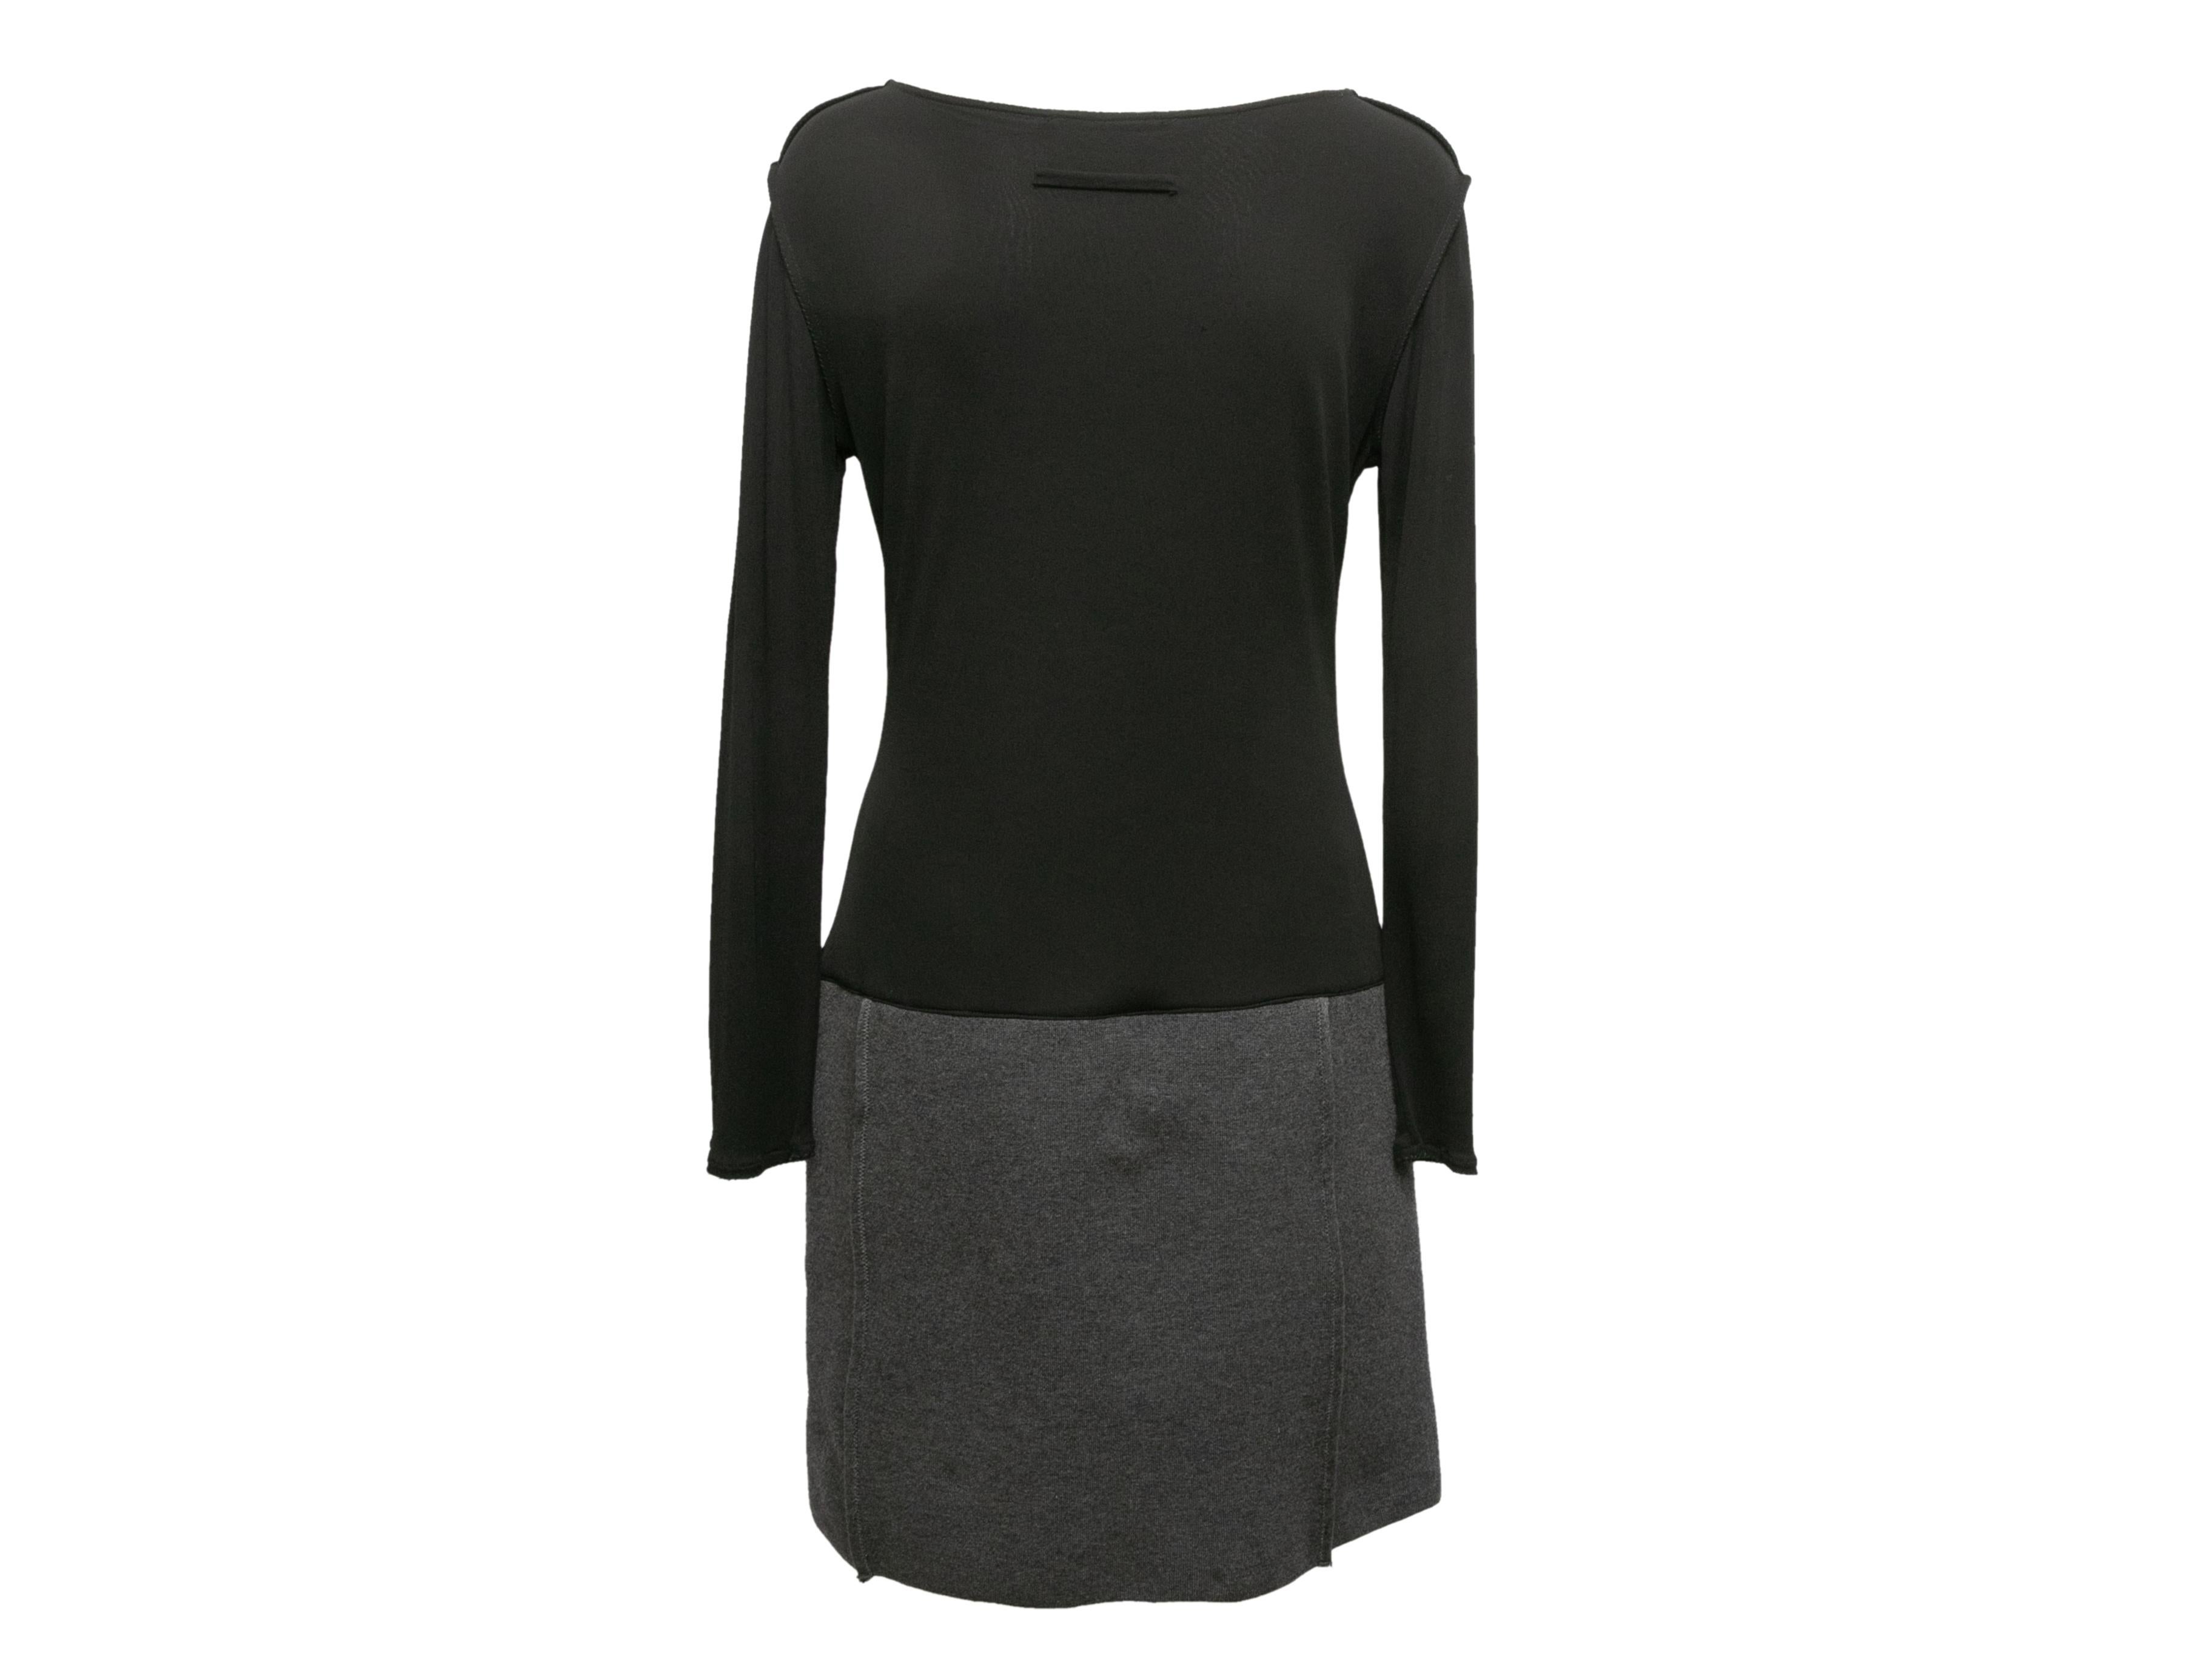 Vintage black and grey virgin wool dress by Jean Paul Gaultier Maille. Round neckline. Long sleeves. 30